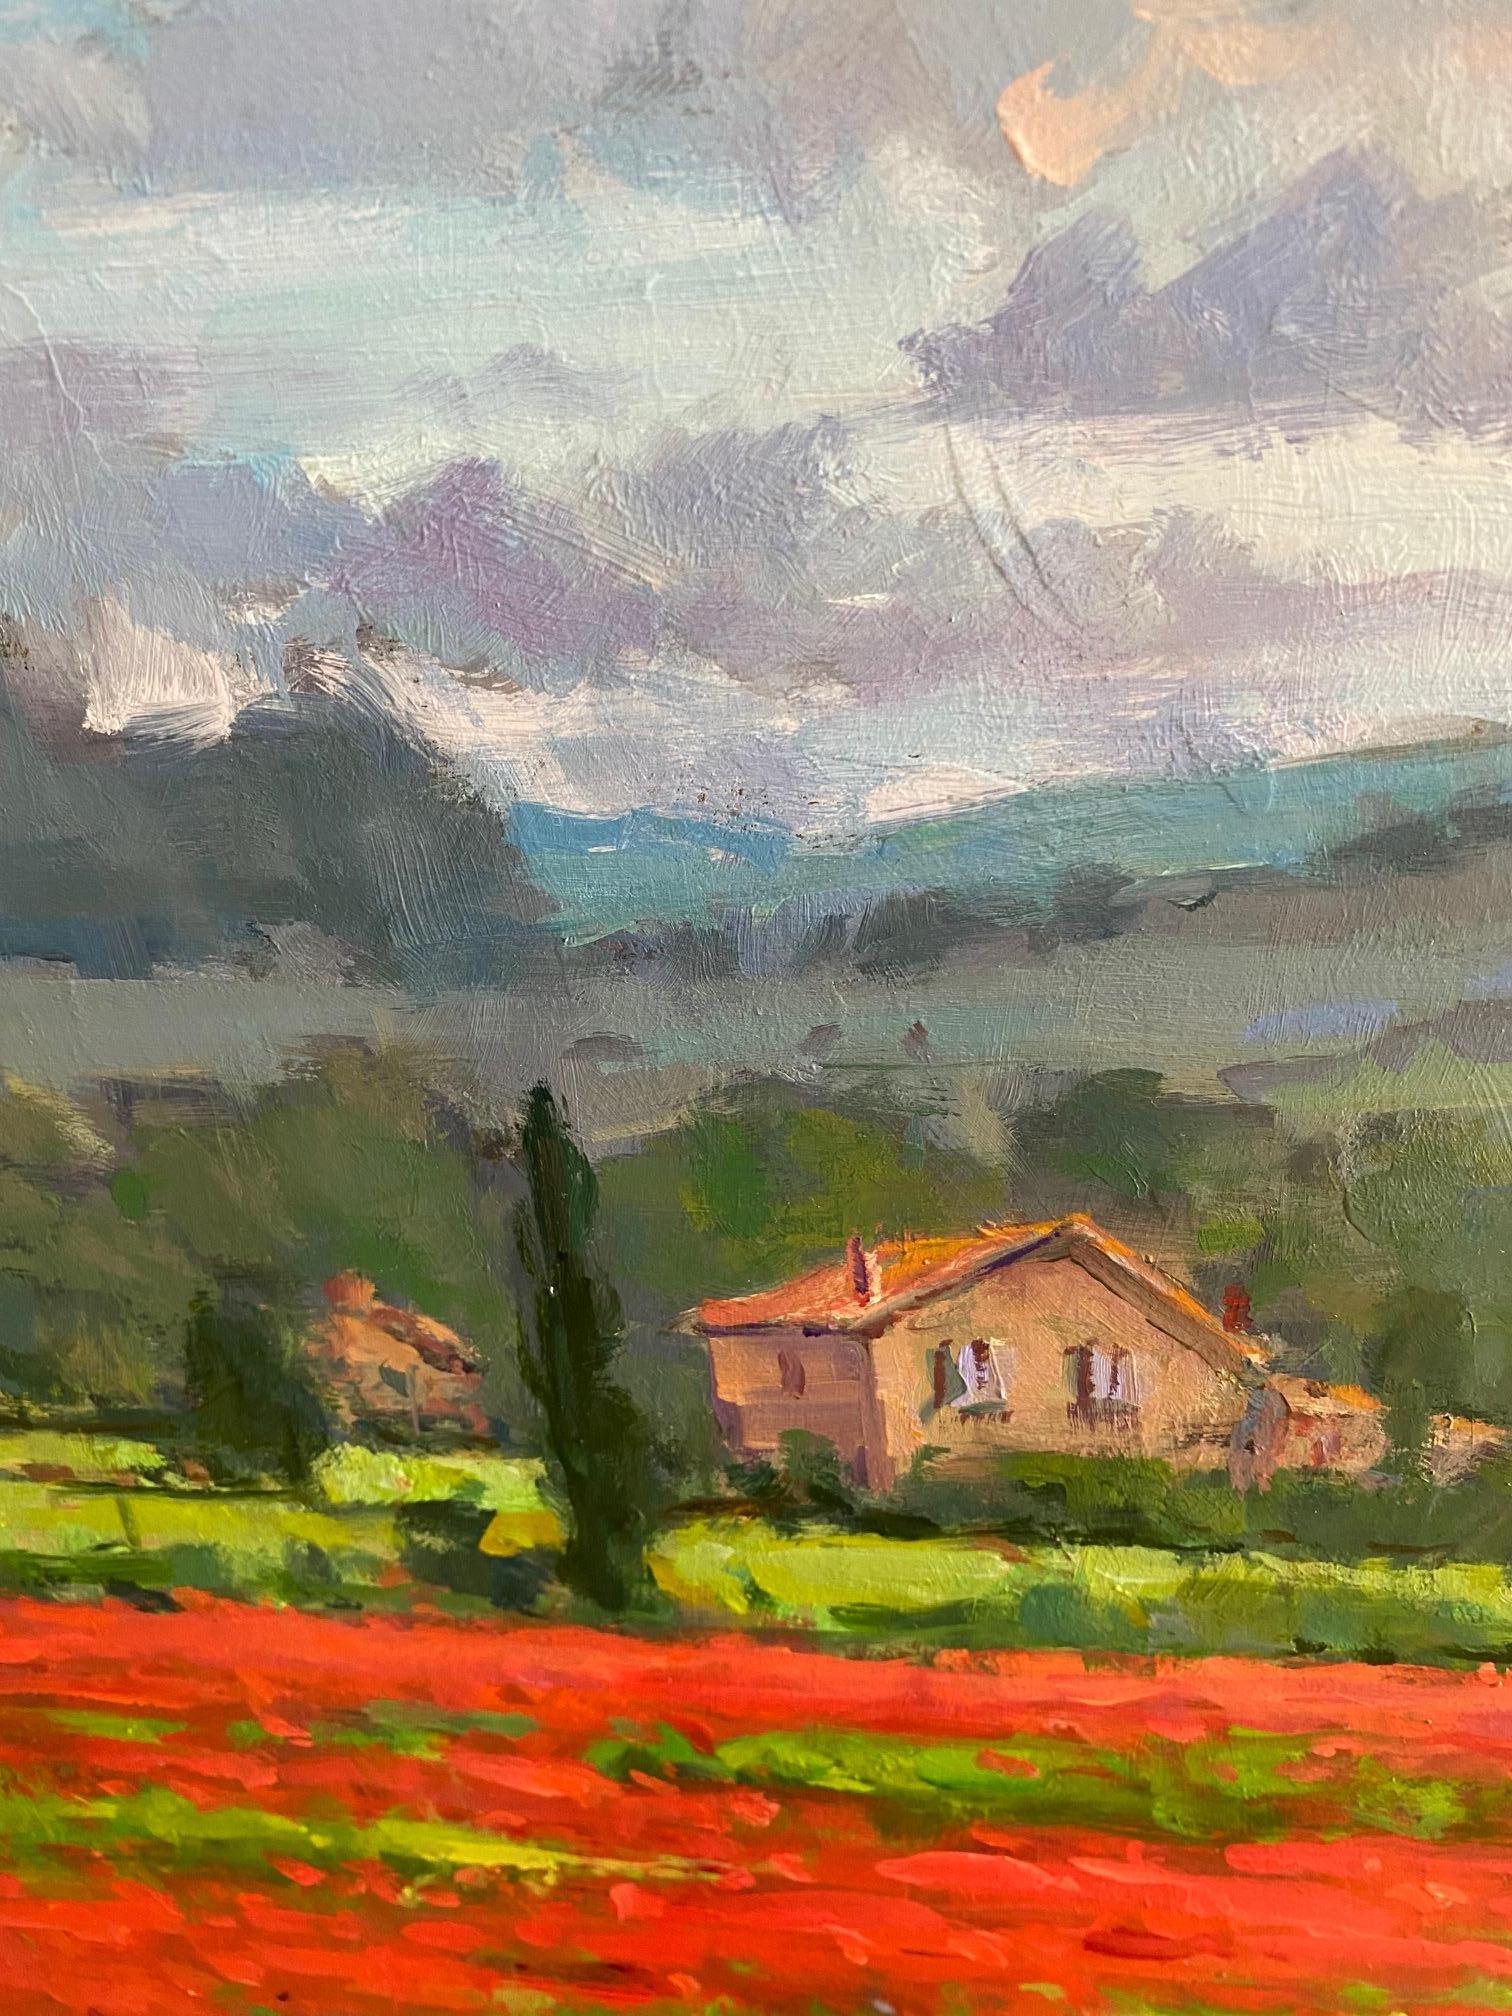 Poppies in the famed French region of Provence is pure magic!  The lush, brilliant red flowers suddenly appear just as they will demure when poppy season has run it's course for the year.  The mesmerizing fields beckon you to trek ahead quickly